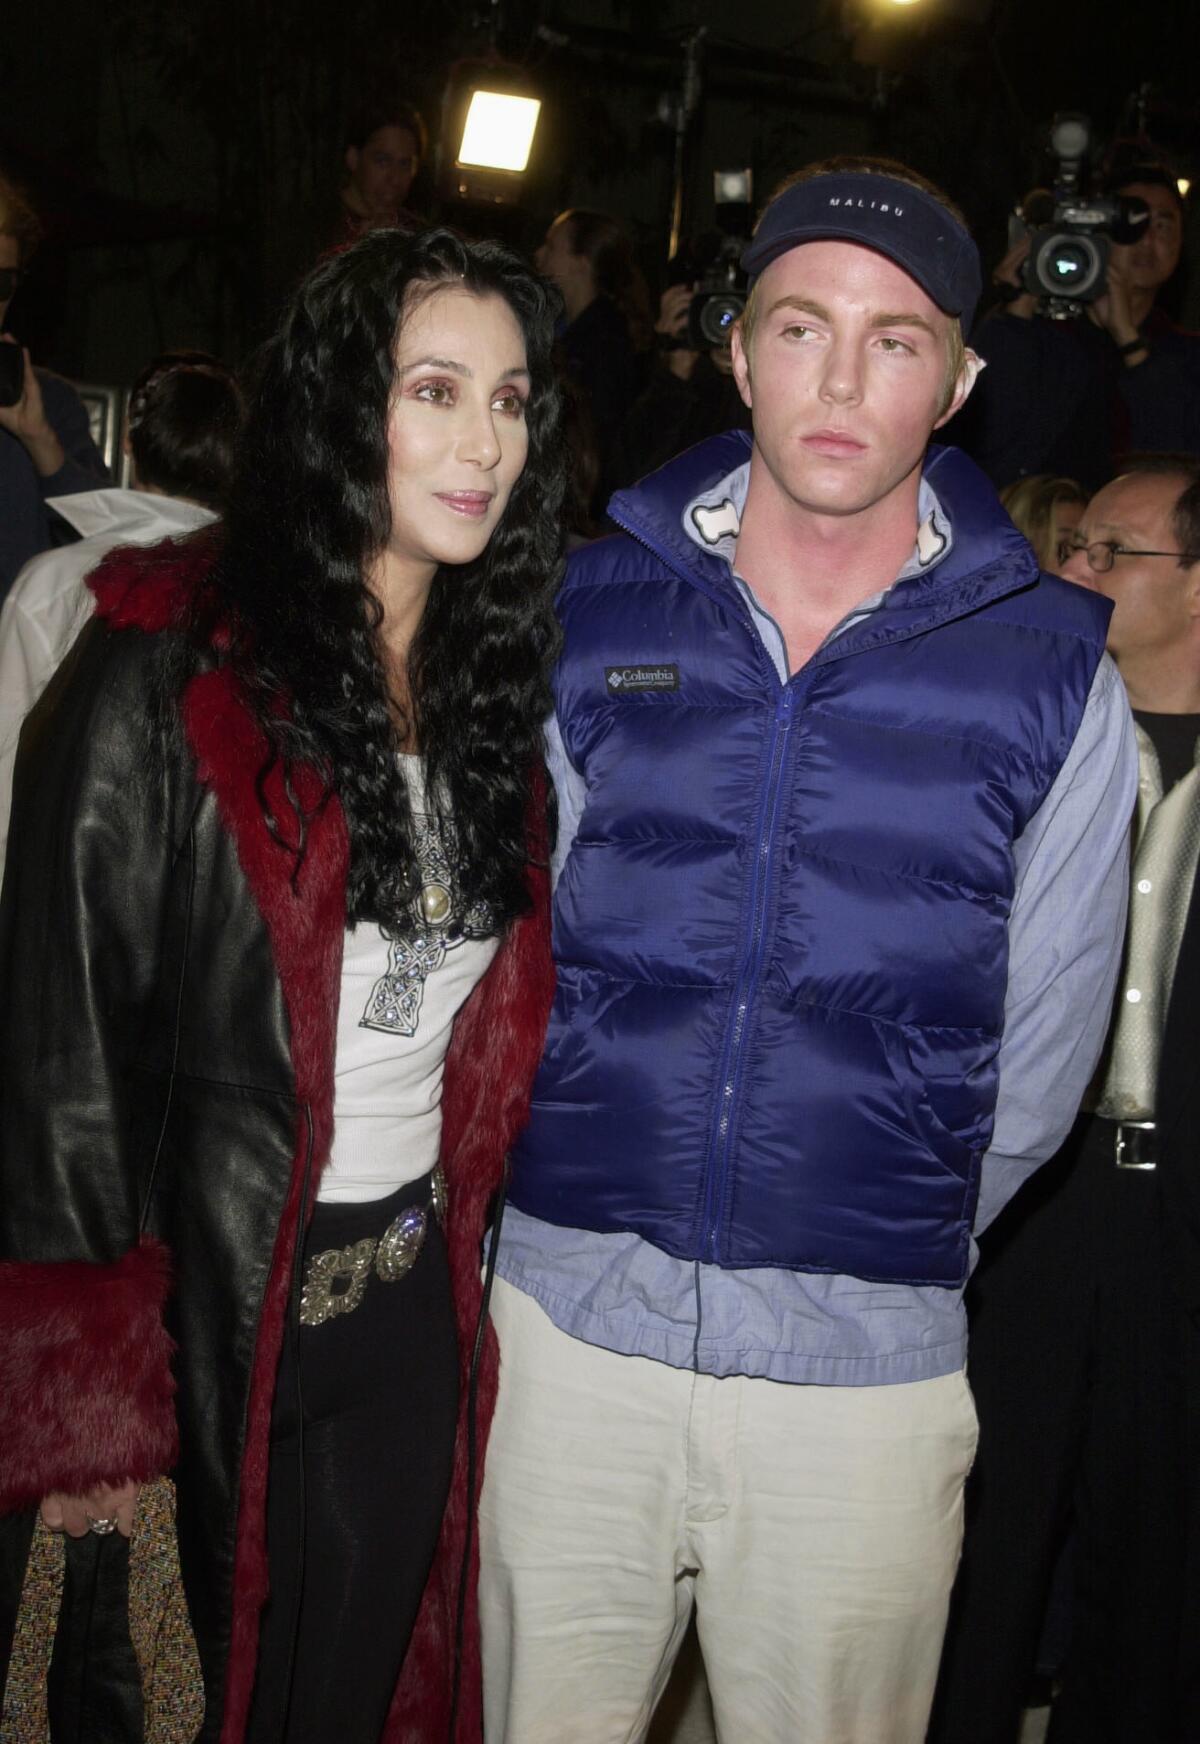 Cher in a black leather trench coat and Elijah Blue Allman in a blue puffer vest stand together at an event